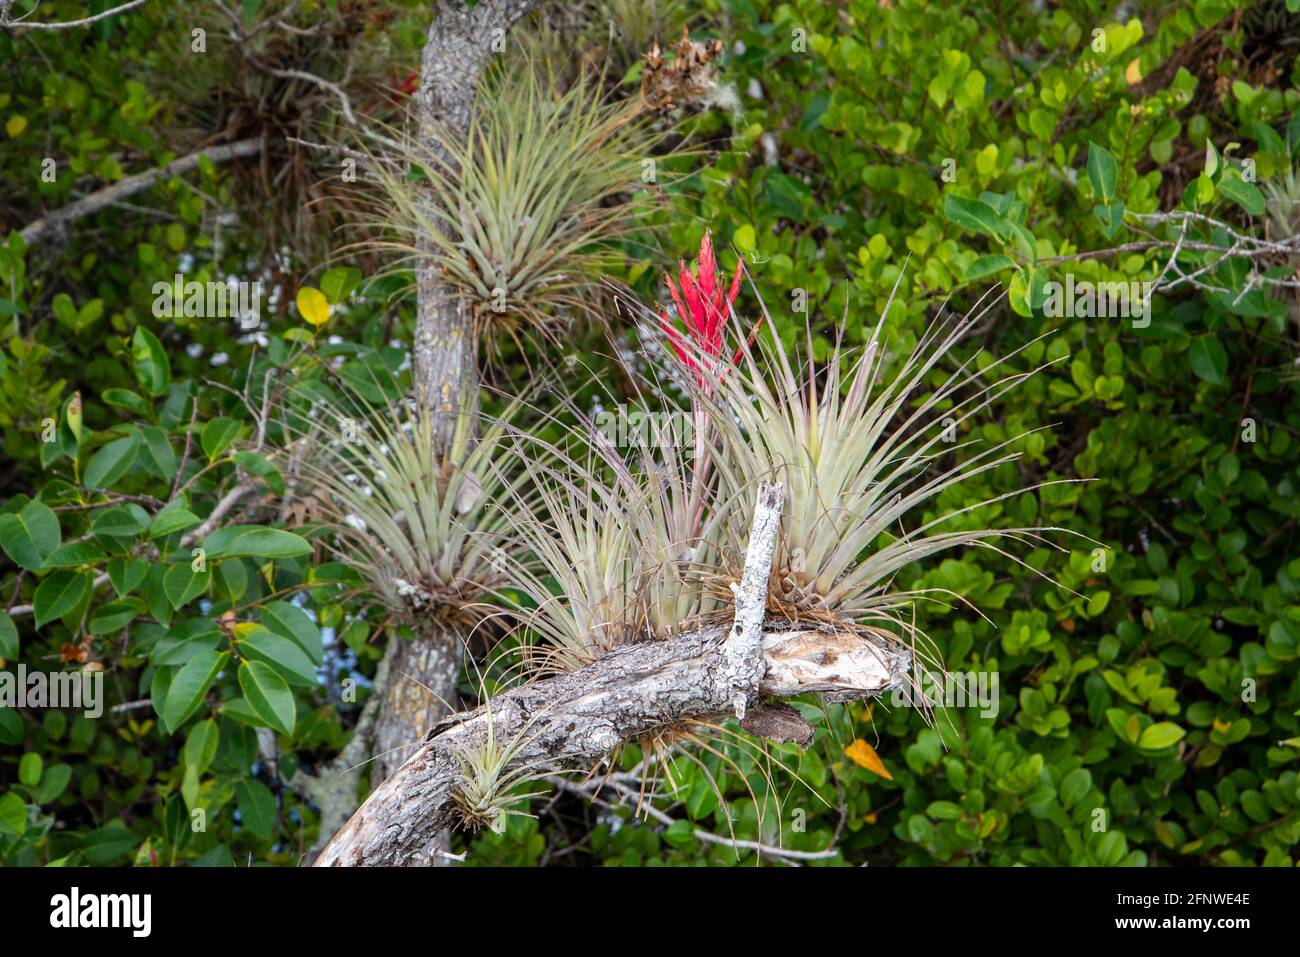 Cardinal airplants growing in Everglades National Park. Stock Photo